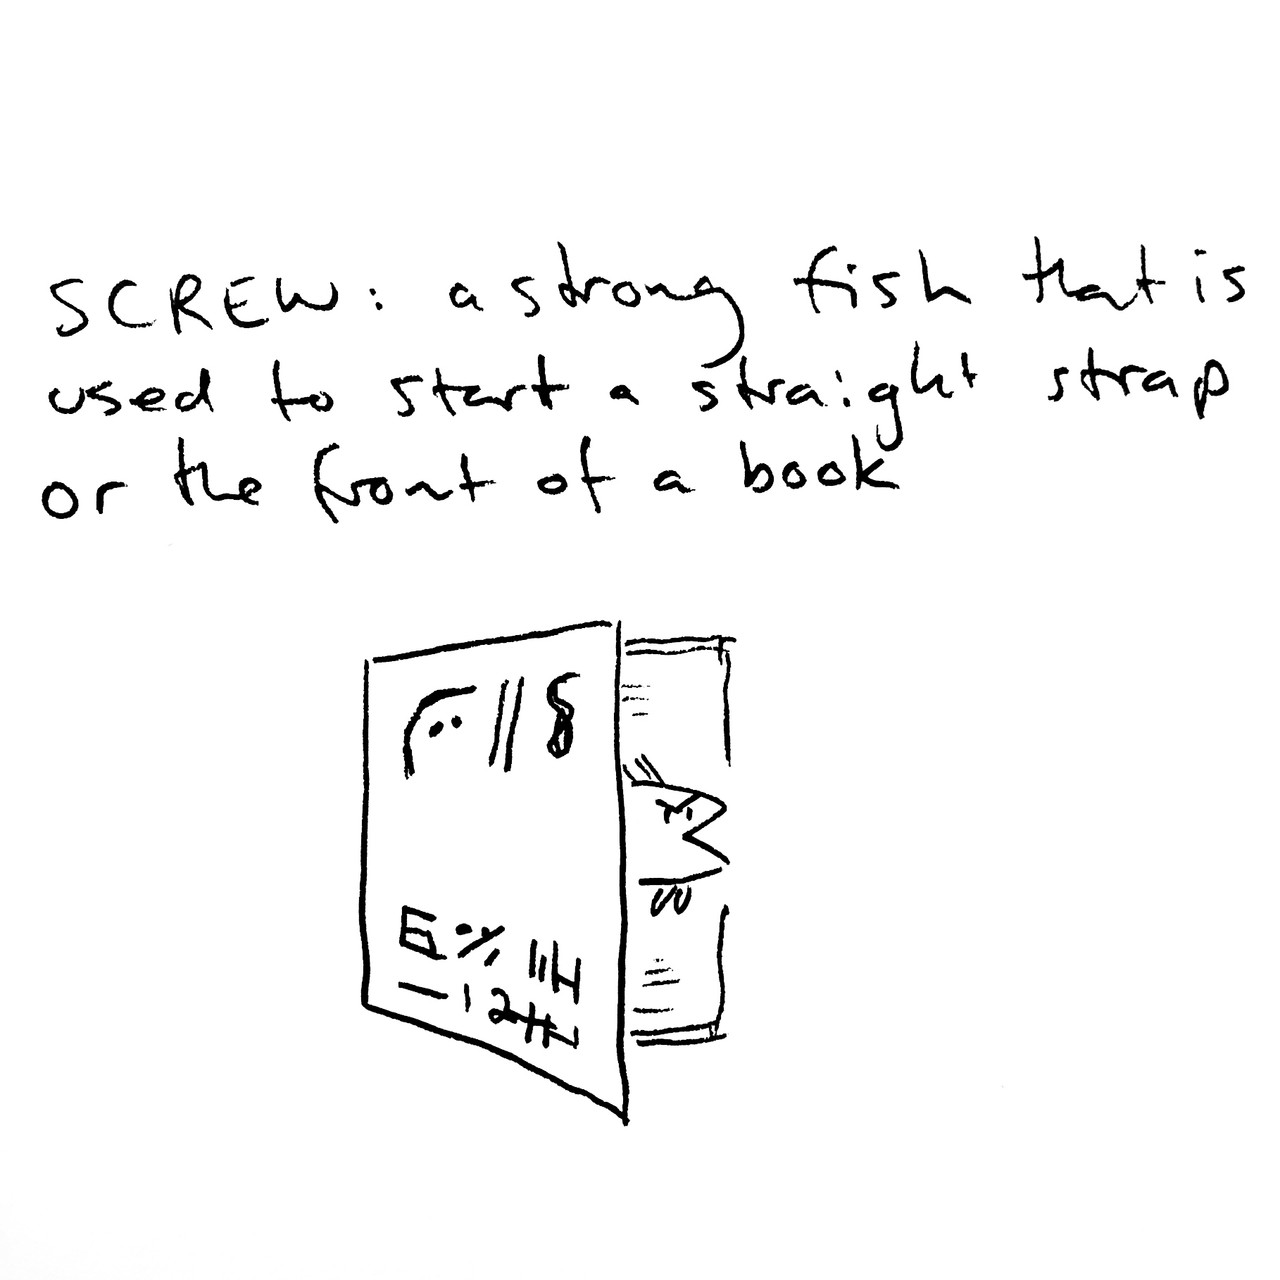 SCREW: a strong fish that is used to start a straight strap or the front of a book. The drawing depicts a book with its front cover partially open with a fish emerging from within.